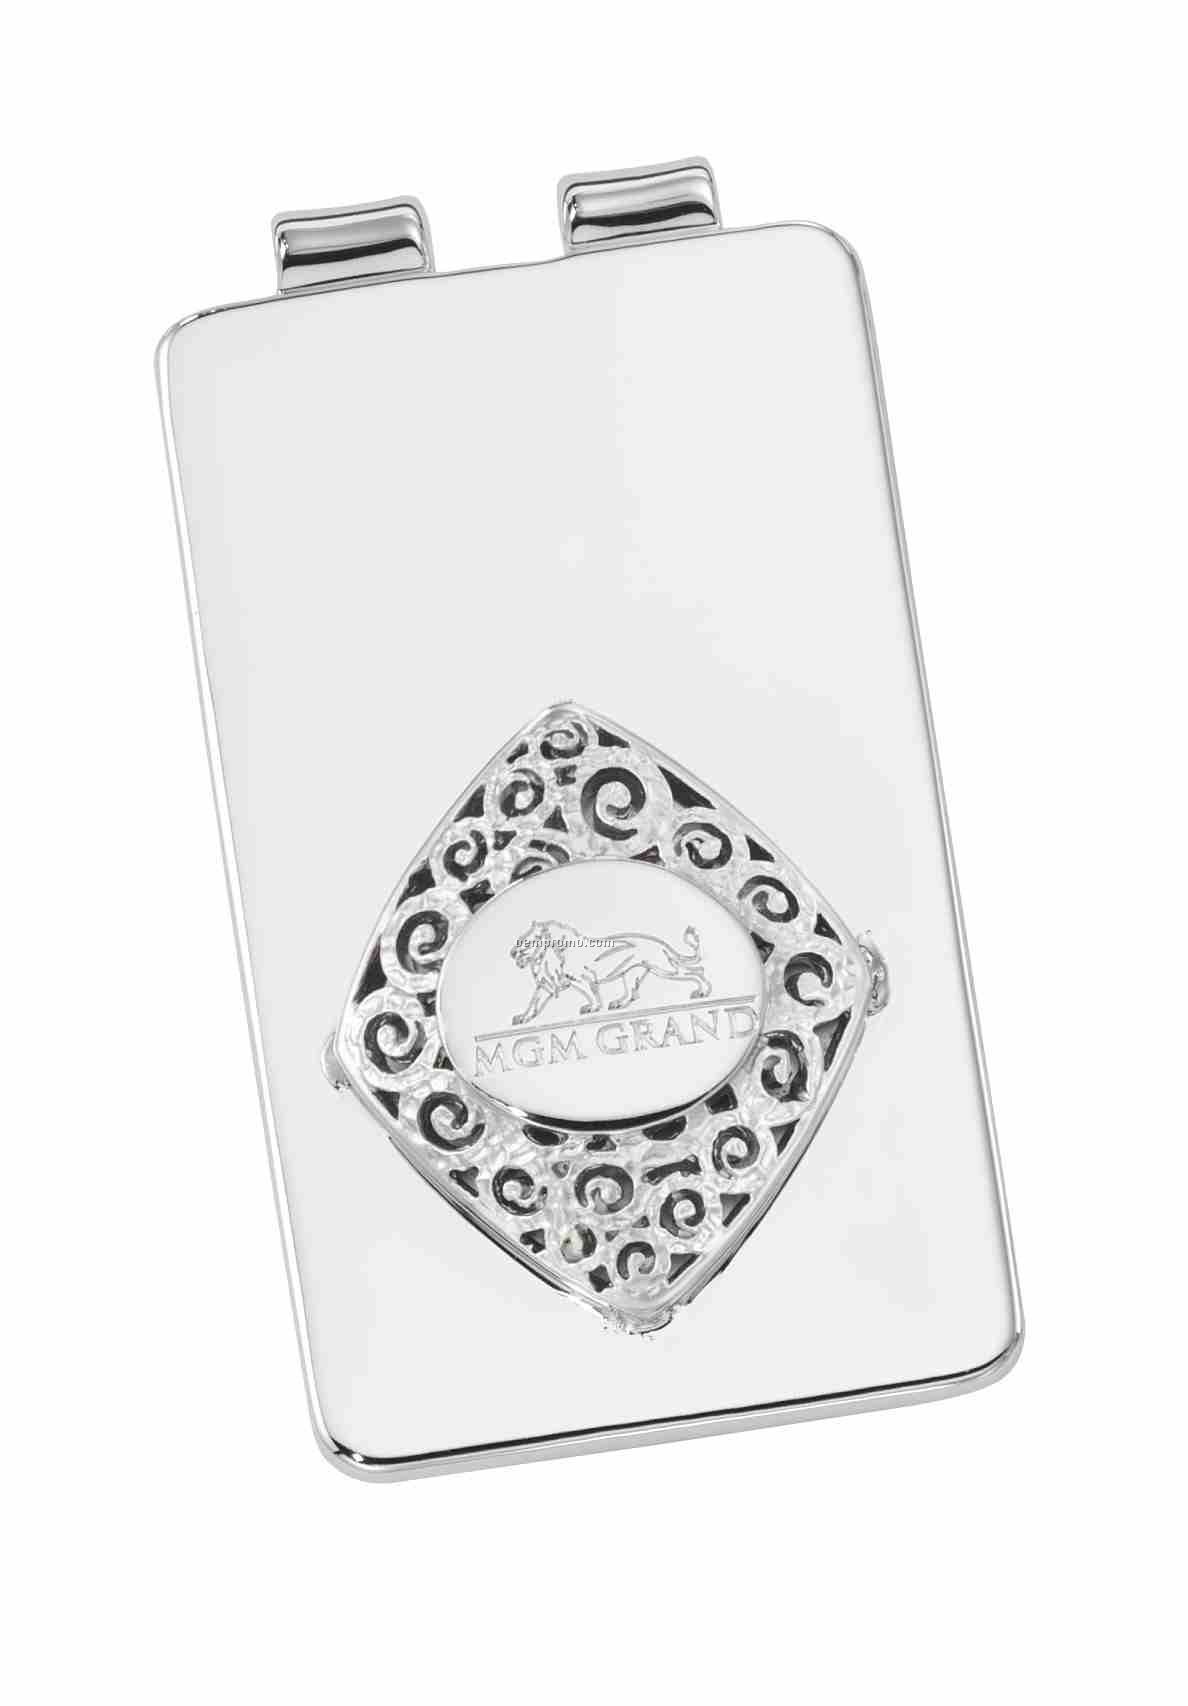 Ovations - Grandeur Silver Plated Money Clip - Oval Area For Laser Engrave